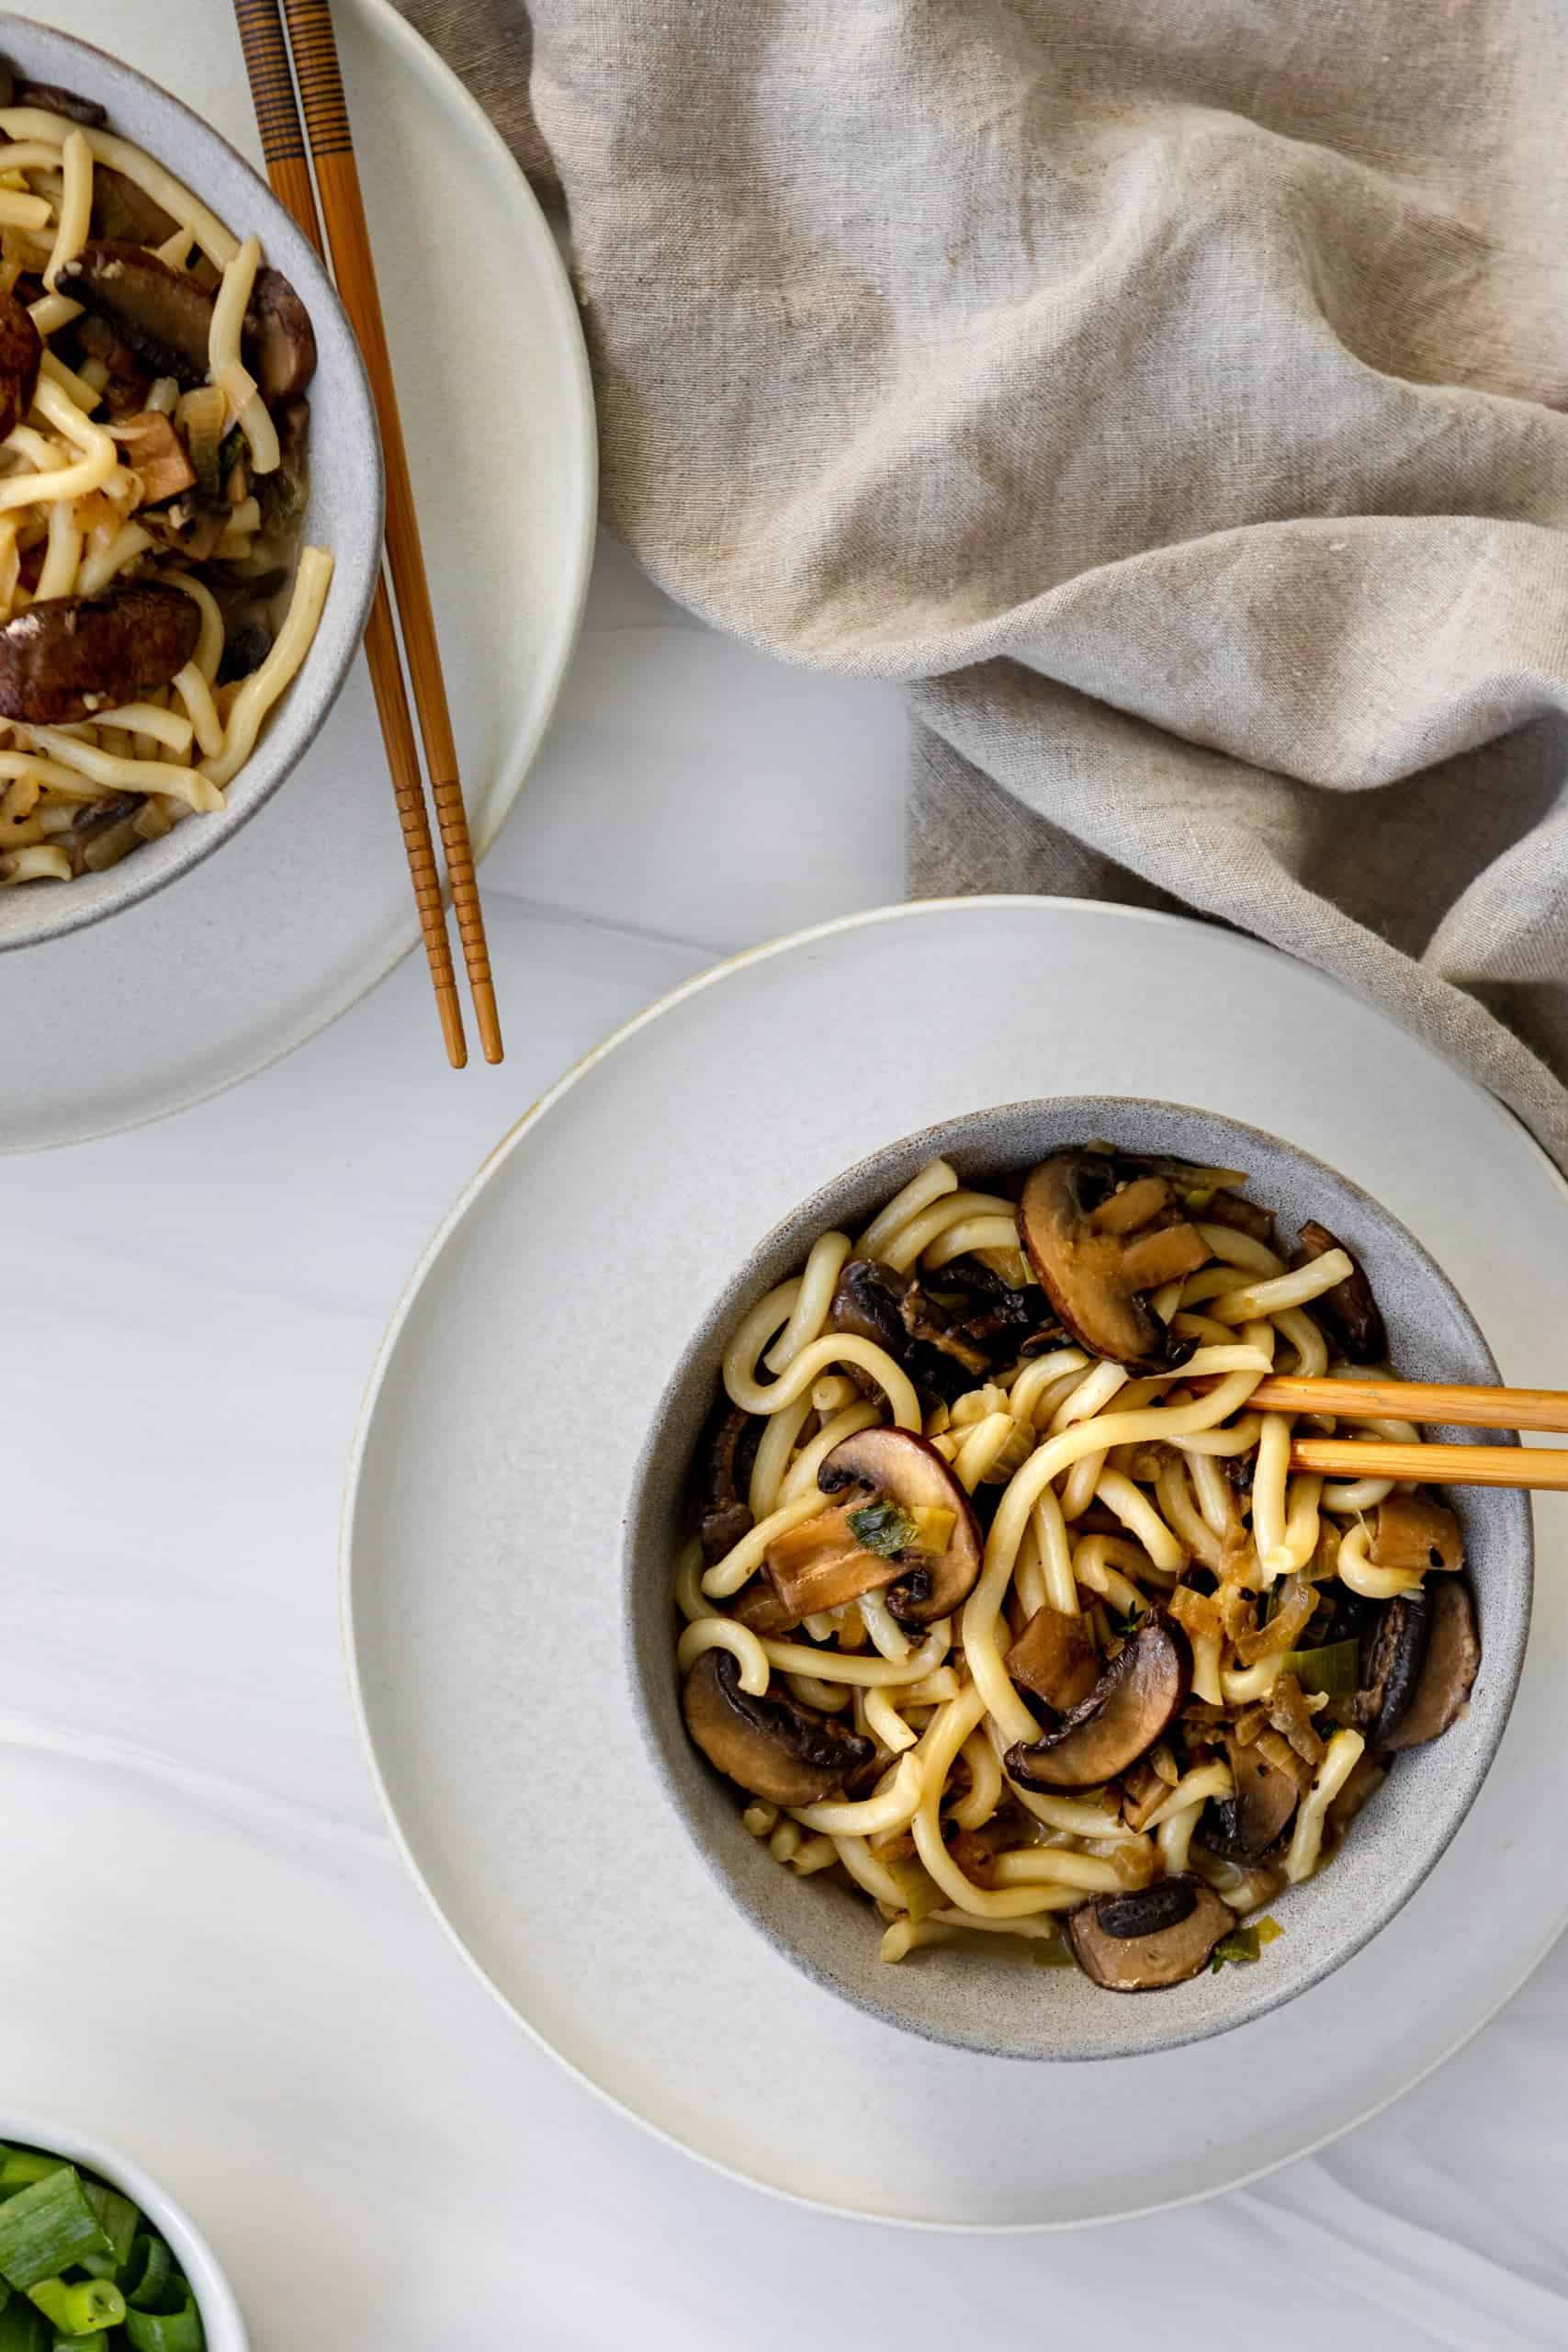 Mushrooms and udon noodles in a bowl with chopsticks